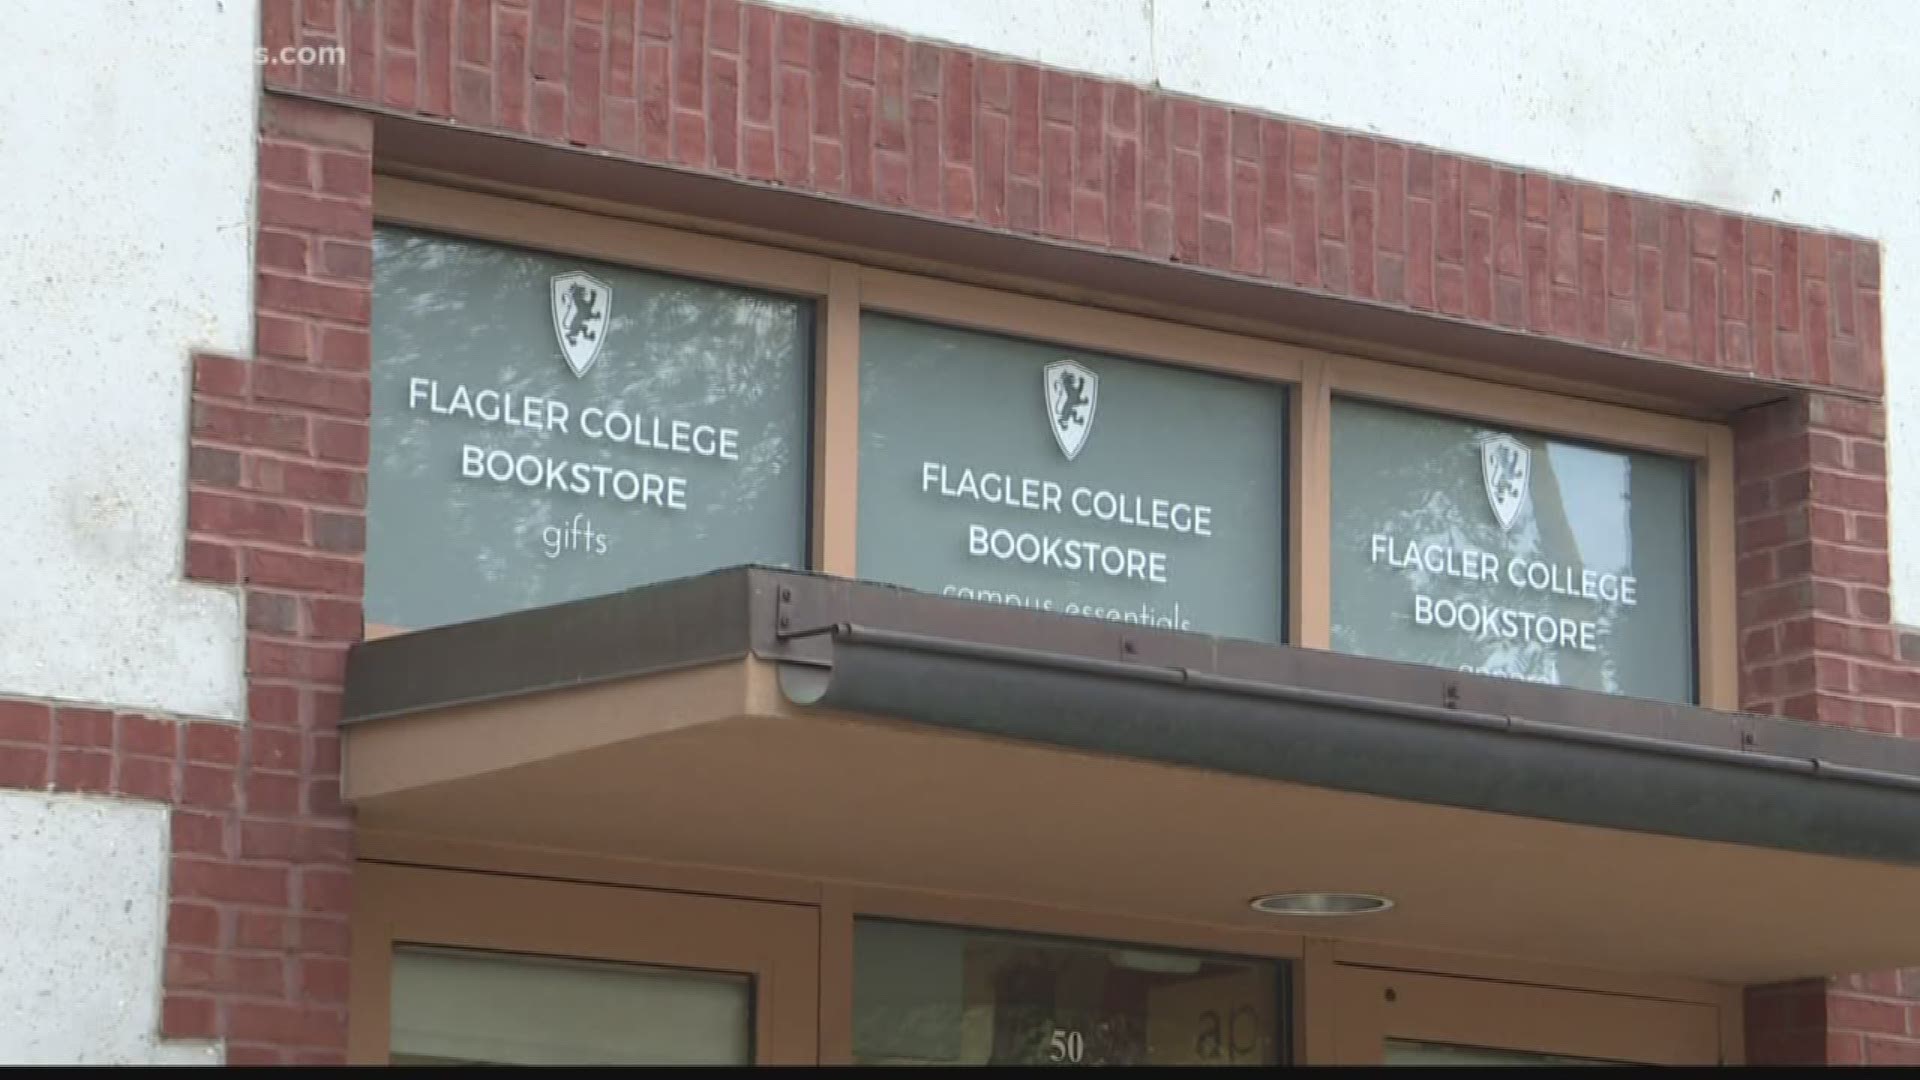 The owner of the bookstore at Flagler College is throwing a going-out-of-business sale after it was bought by Barnes & Noble.